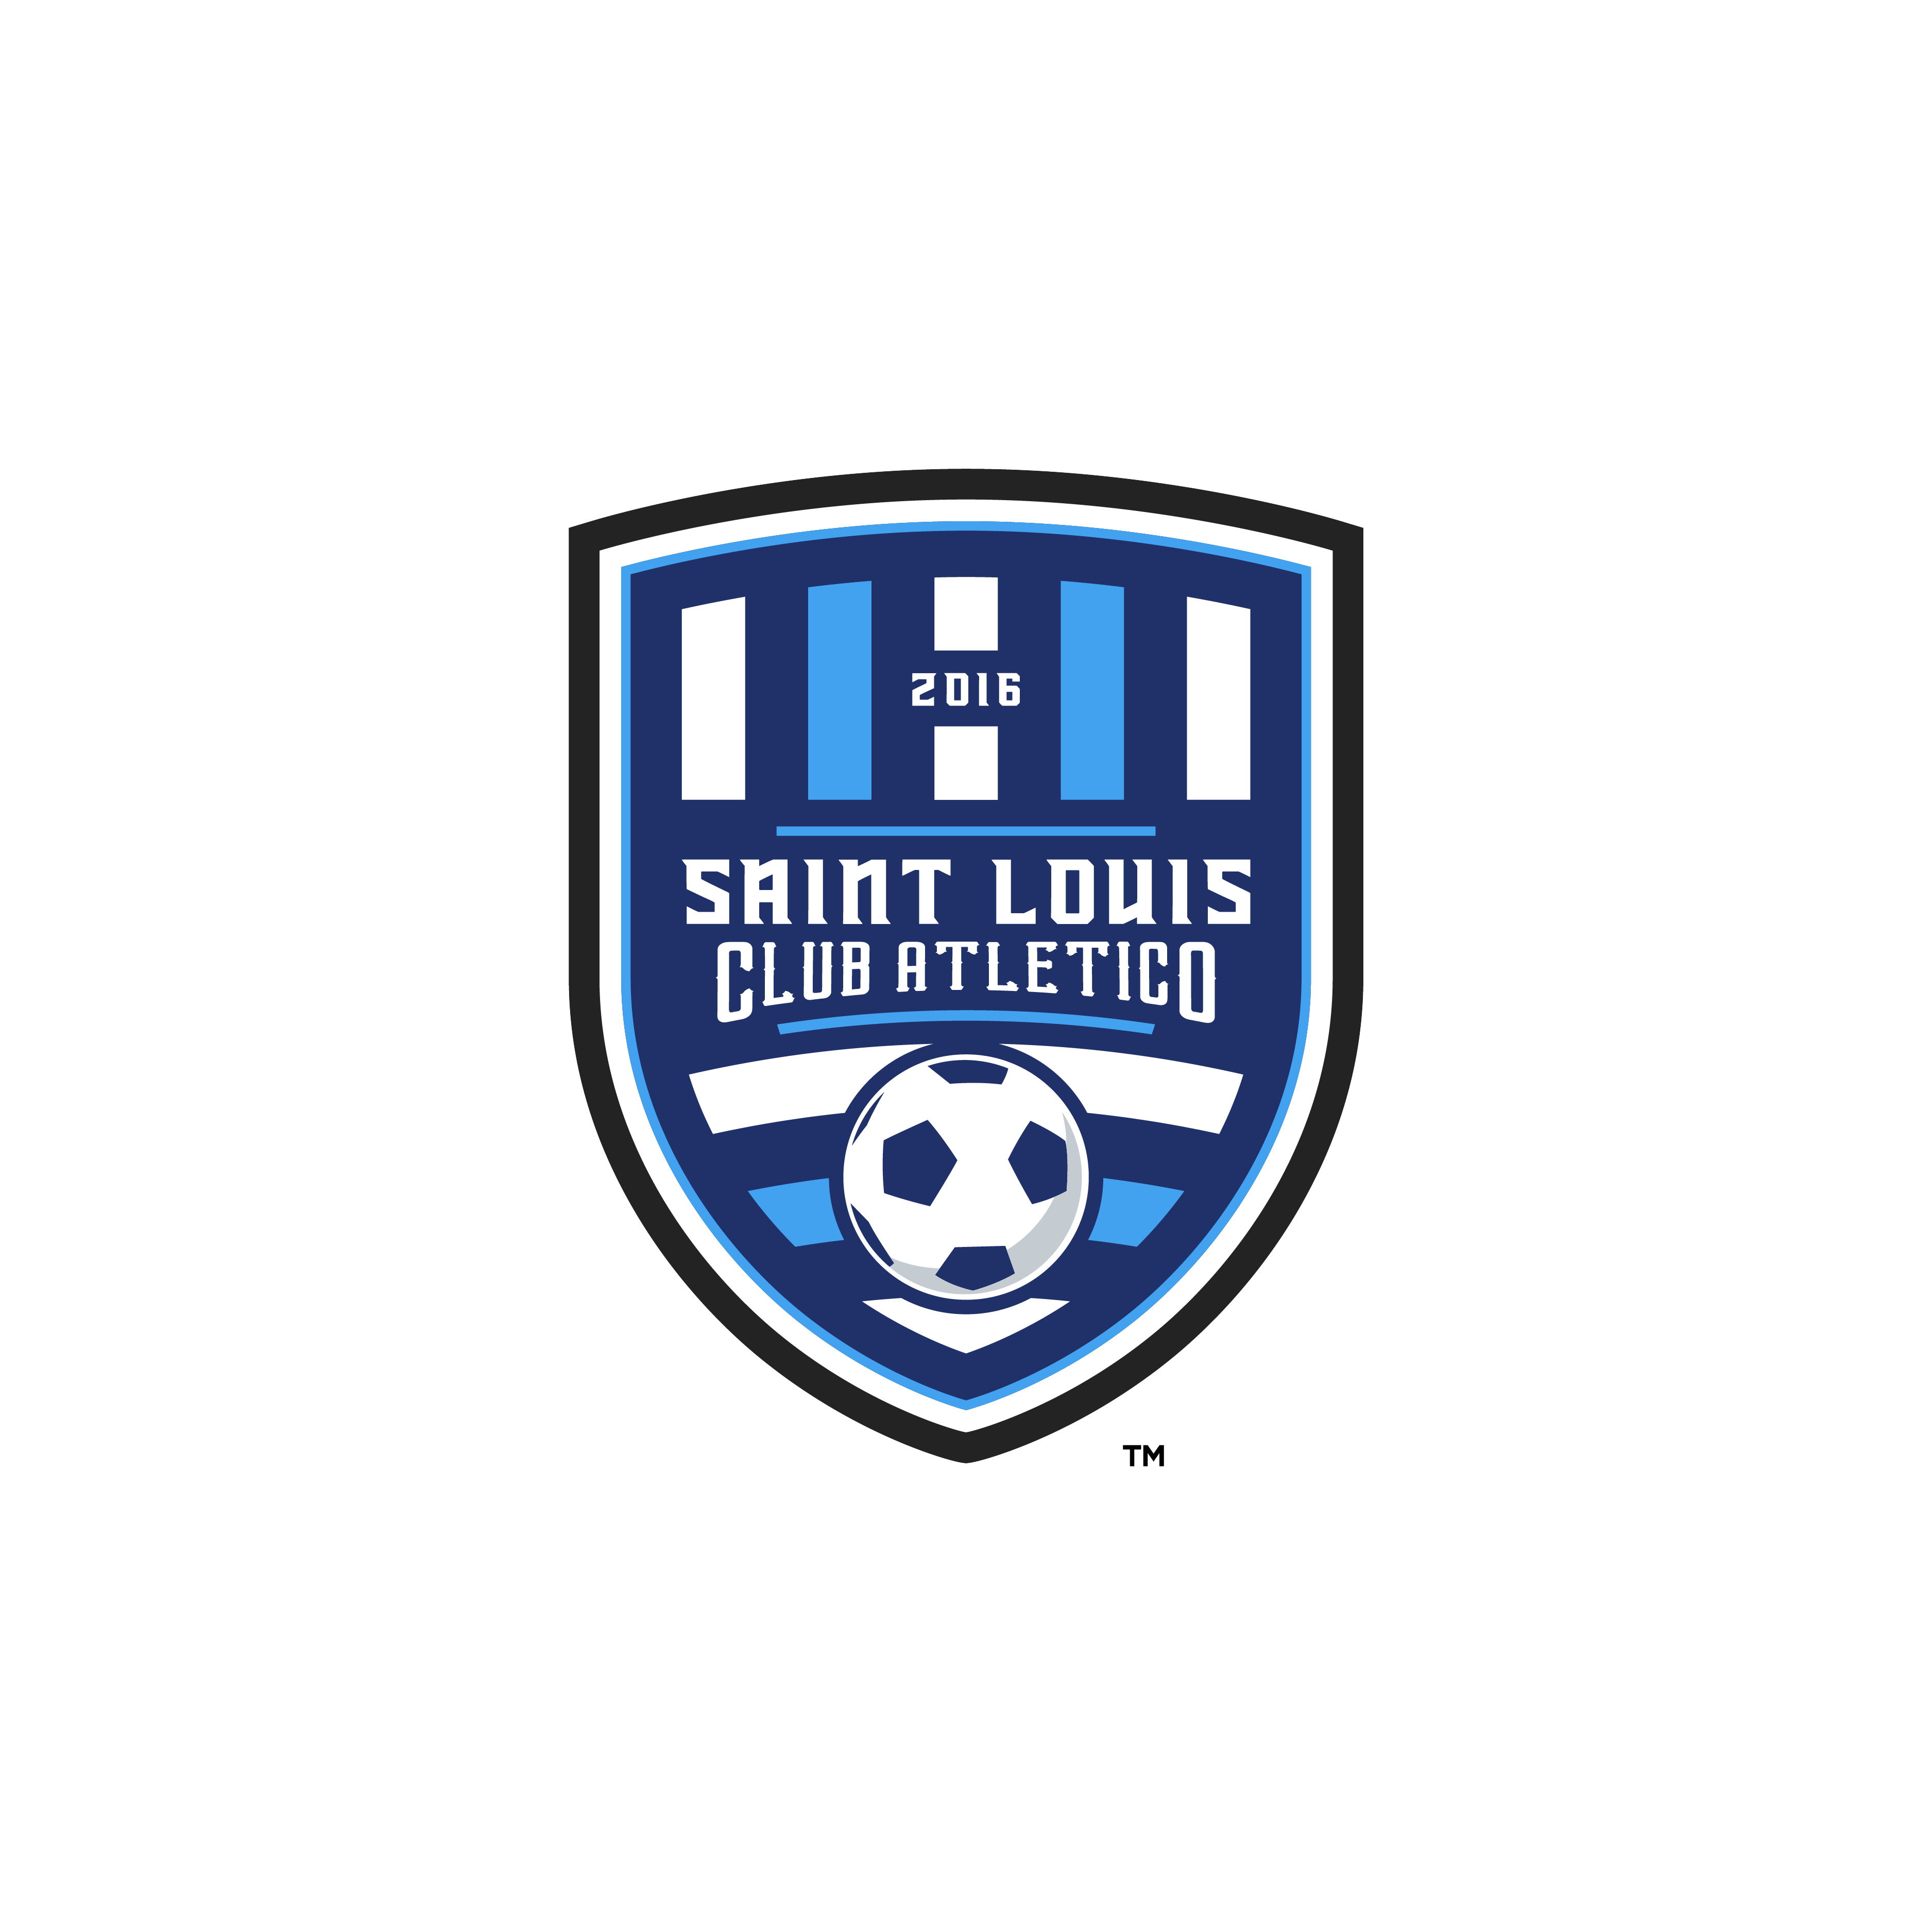 St. Louis Club Atletico logo design by logo designer Nijaz Muratovic for your inspiration and for the worlds largest logo competition